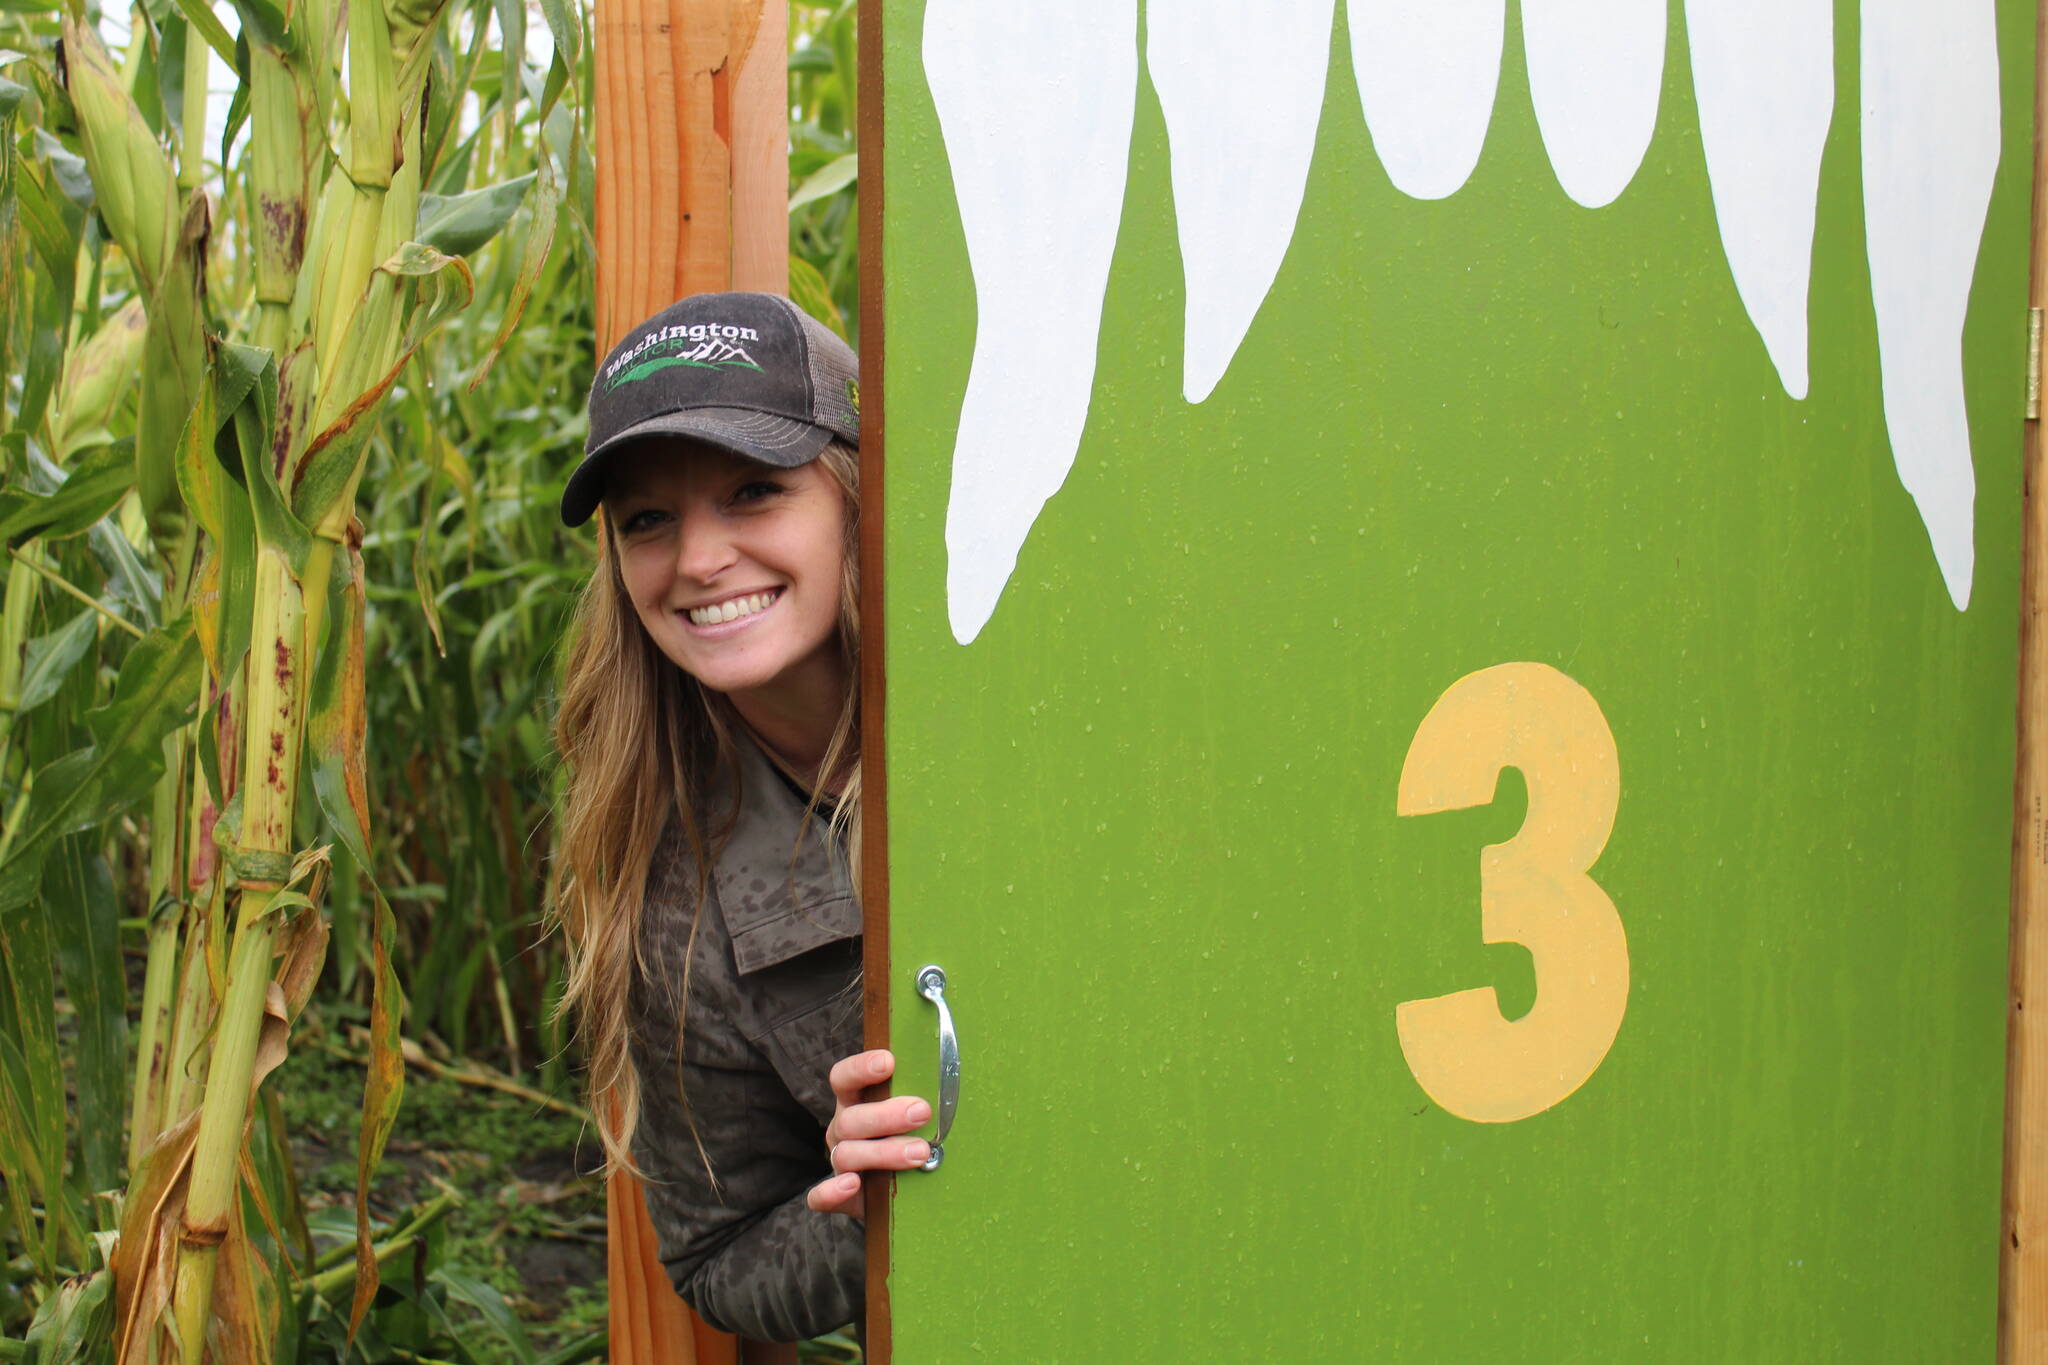 Photo by Karina Andrew/Whidbey News-Times
The Whidbey Farm and Market corn maze begins with five, spooky doors leading into different sectors of the maze. Above, Shannon Hamilton peeks out from behind door number three. Enter if you dare!